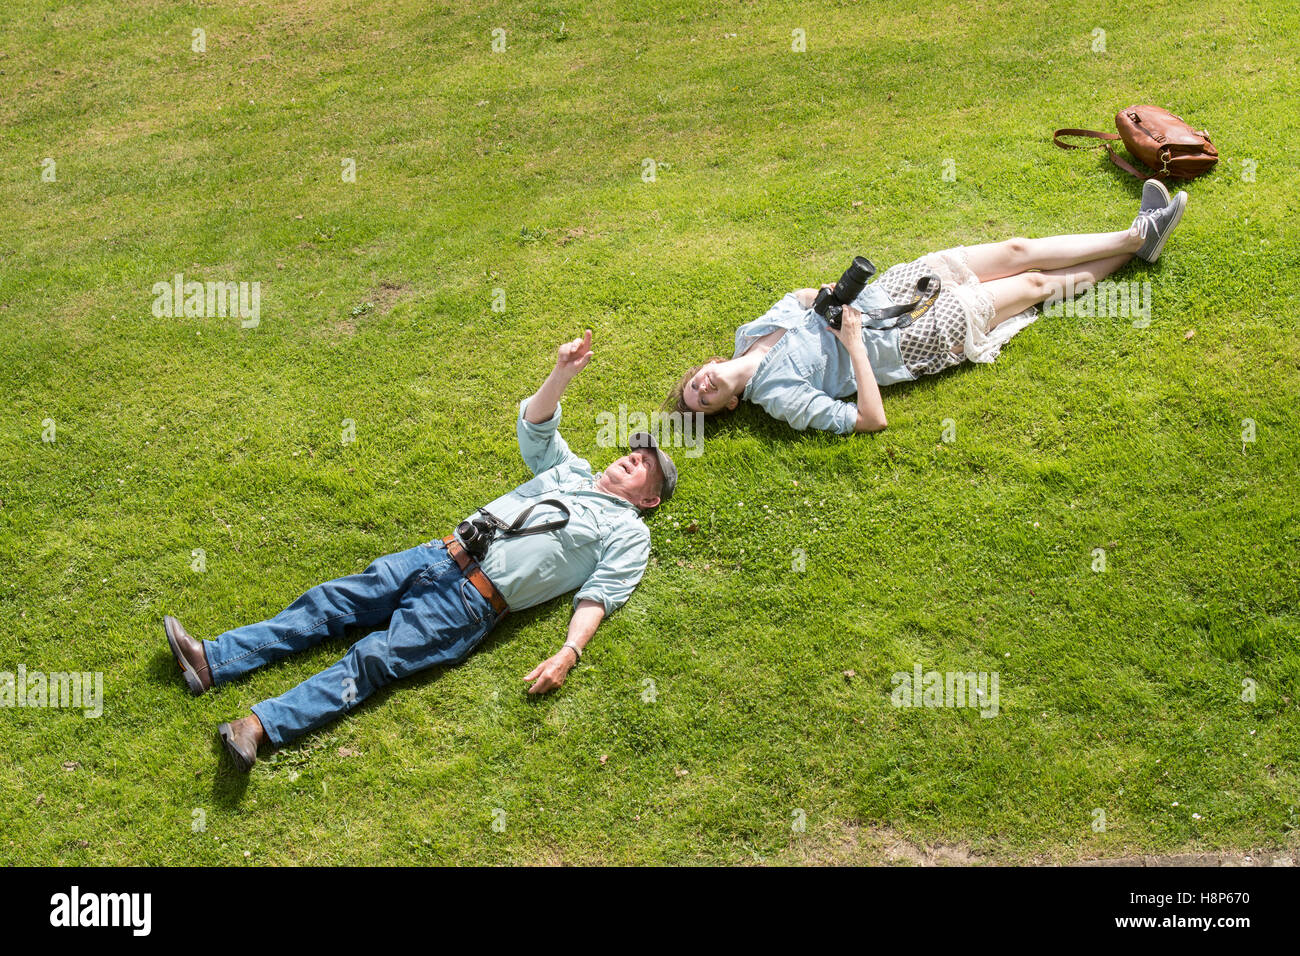 UK, England, Yorkshire, Richmond - An above view of a young female tourist and an old man with their cameras laying in a field l Stock Photo